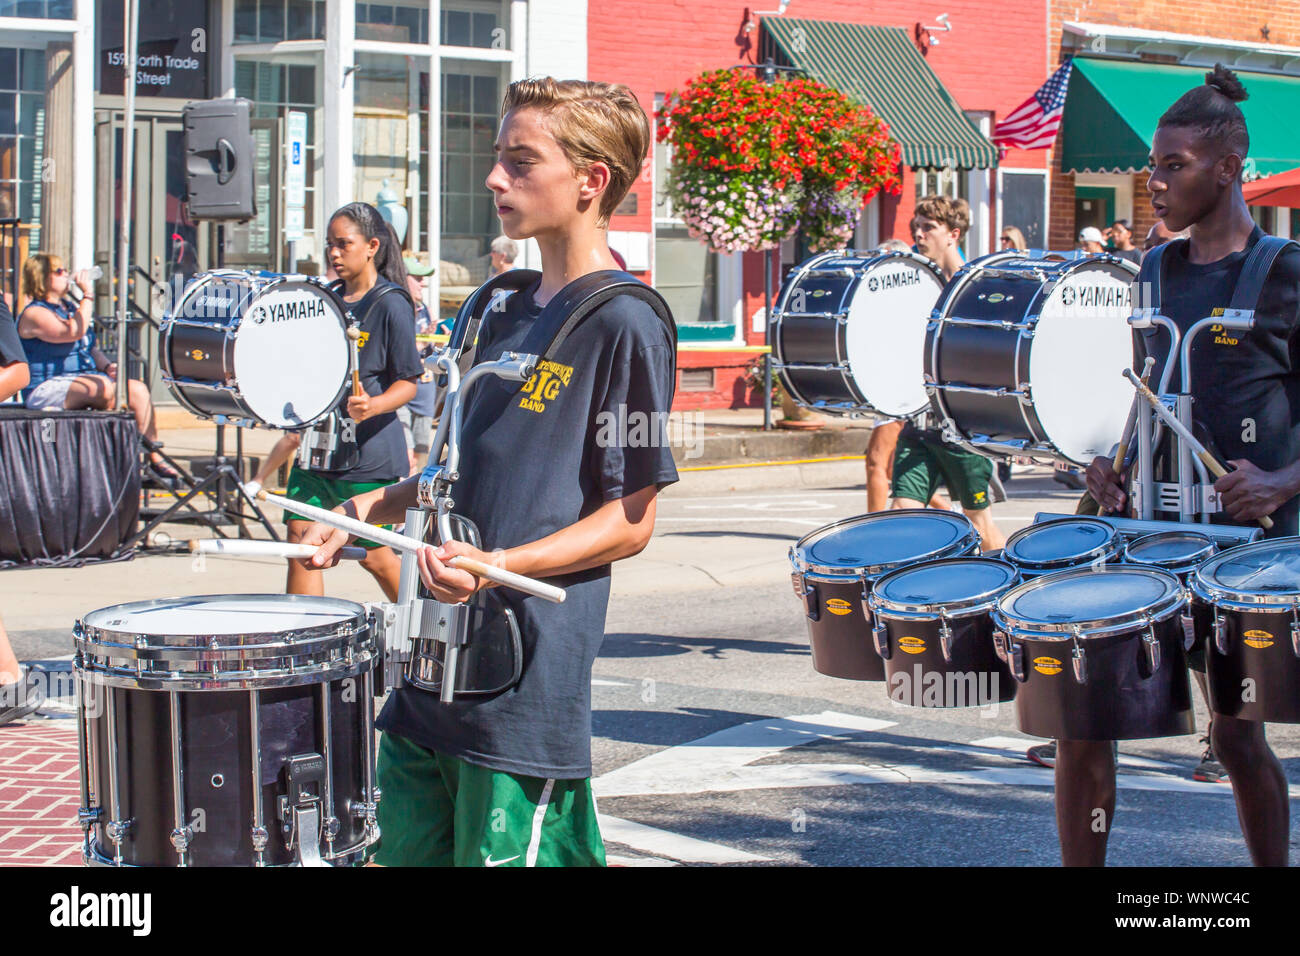 MATTHEWS, NC (USA) - August 31, 2019: A high school marching band performs at the Labor Day parade held during the annual "Matthews Alive" event. Stock Photo